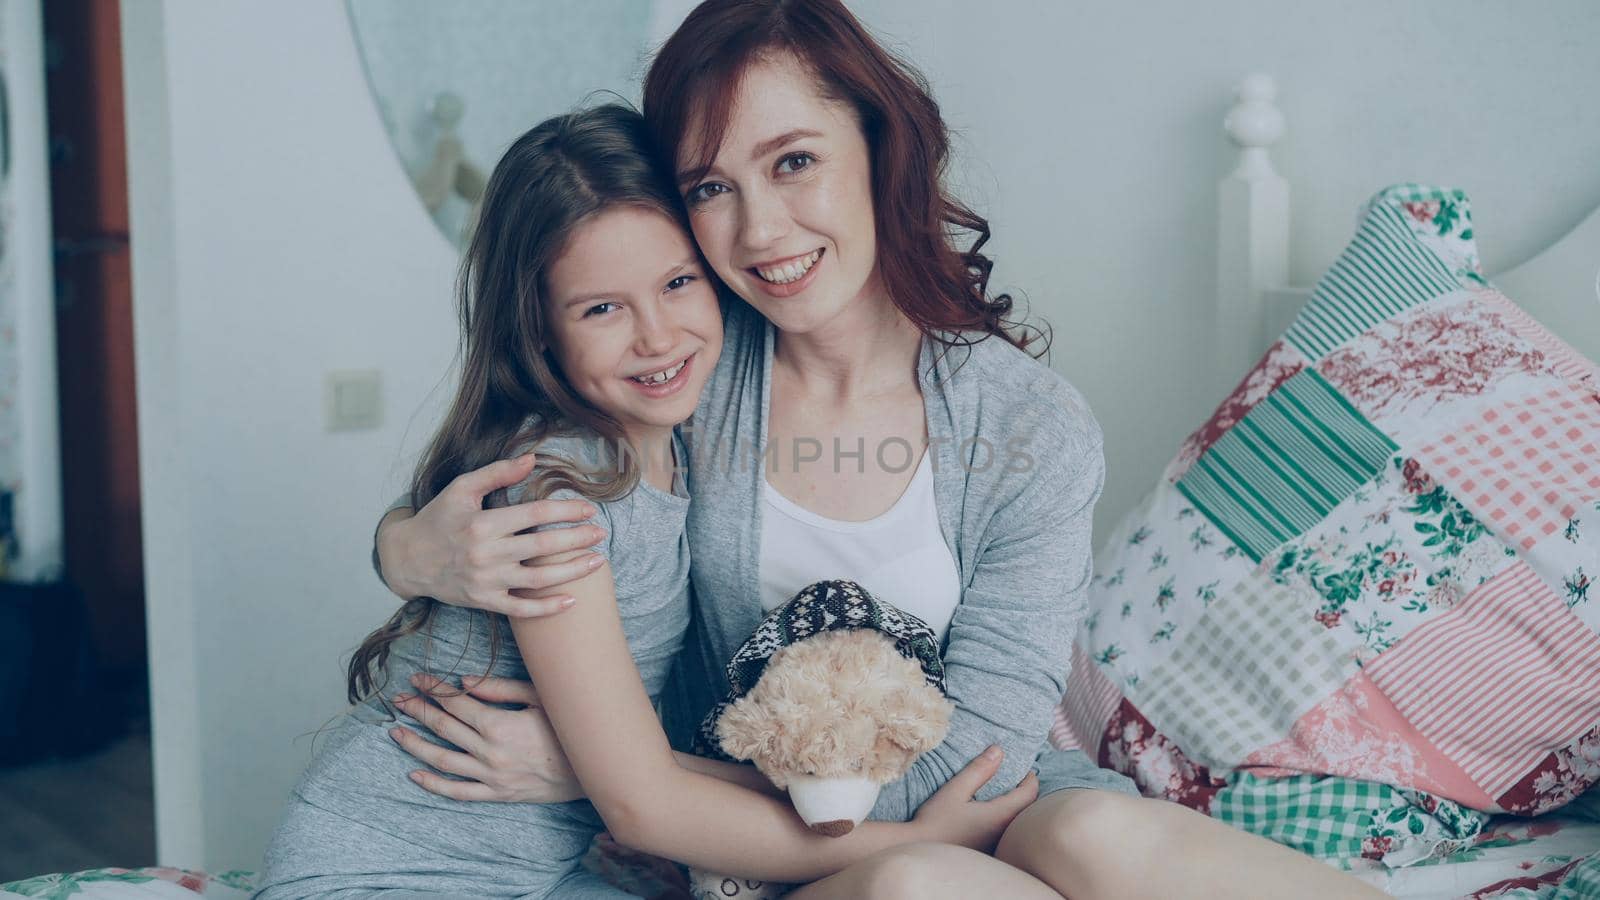 Portrait of adorable smiling girl embracing her happy mother and looking at camera together while sitting on bed in bright cozy bedroom at home